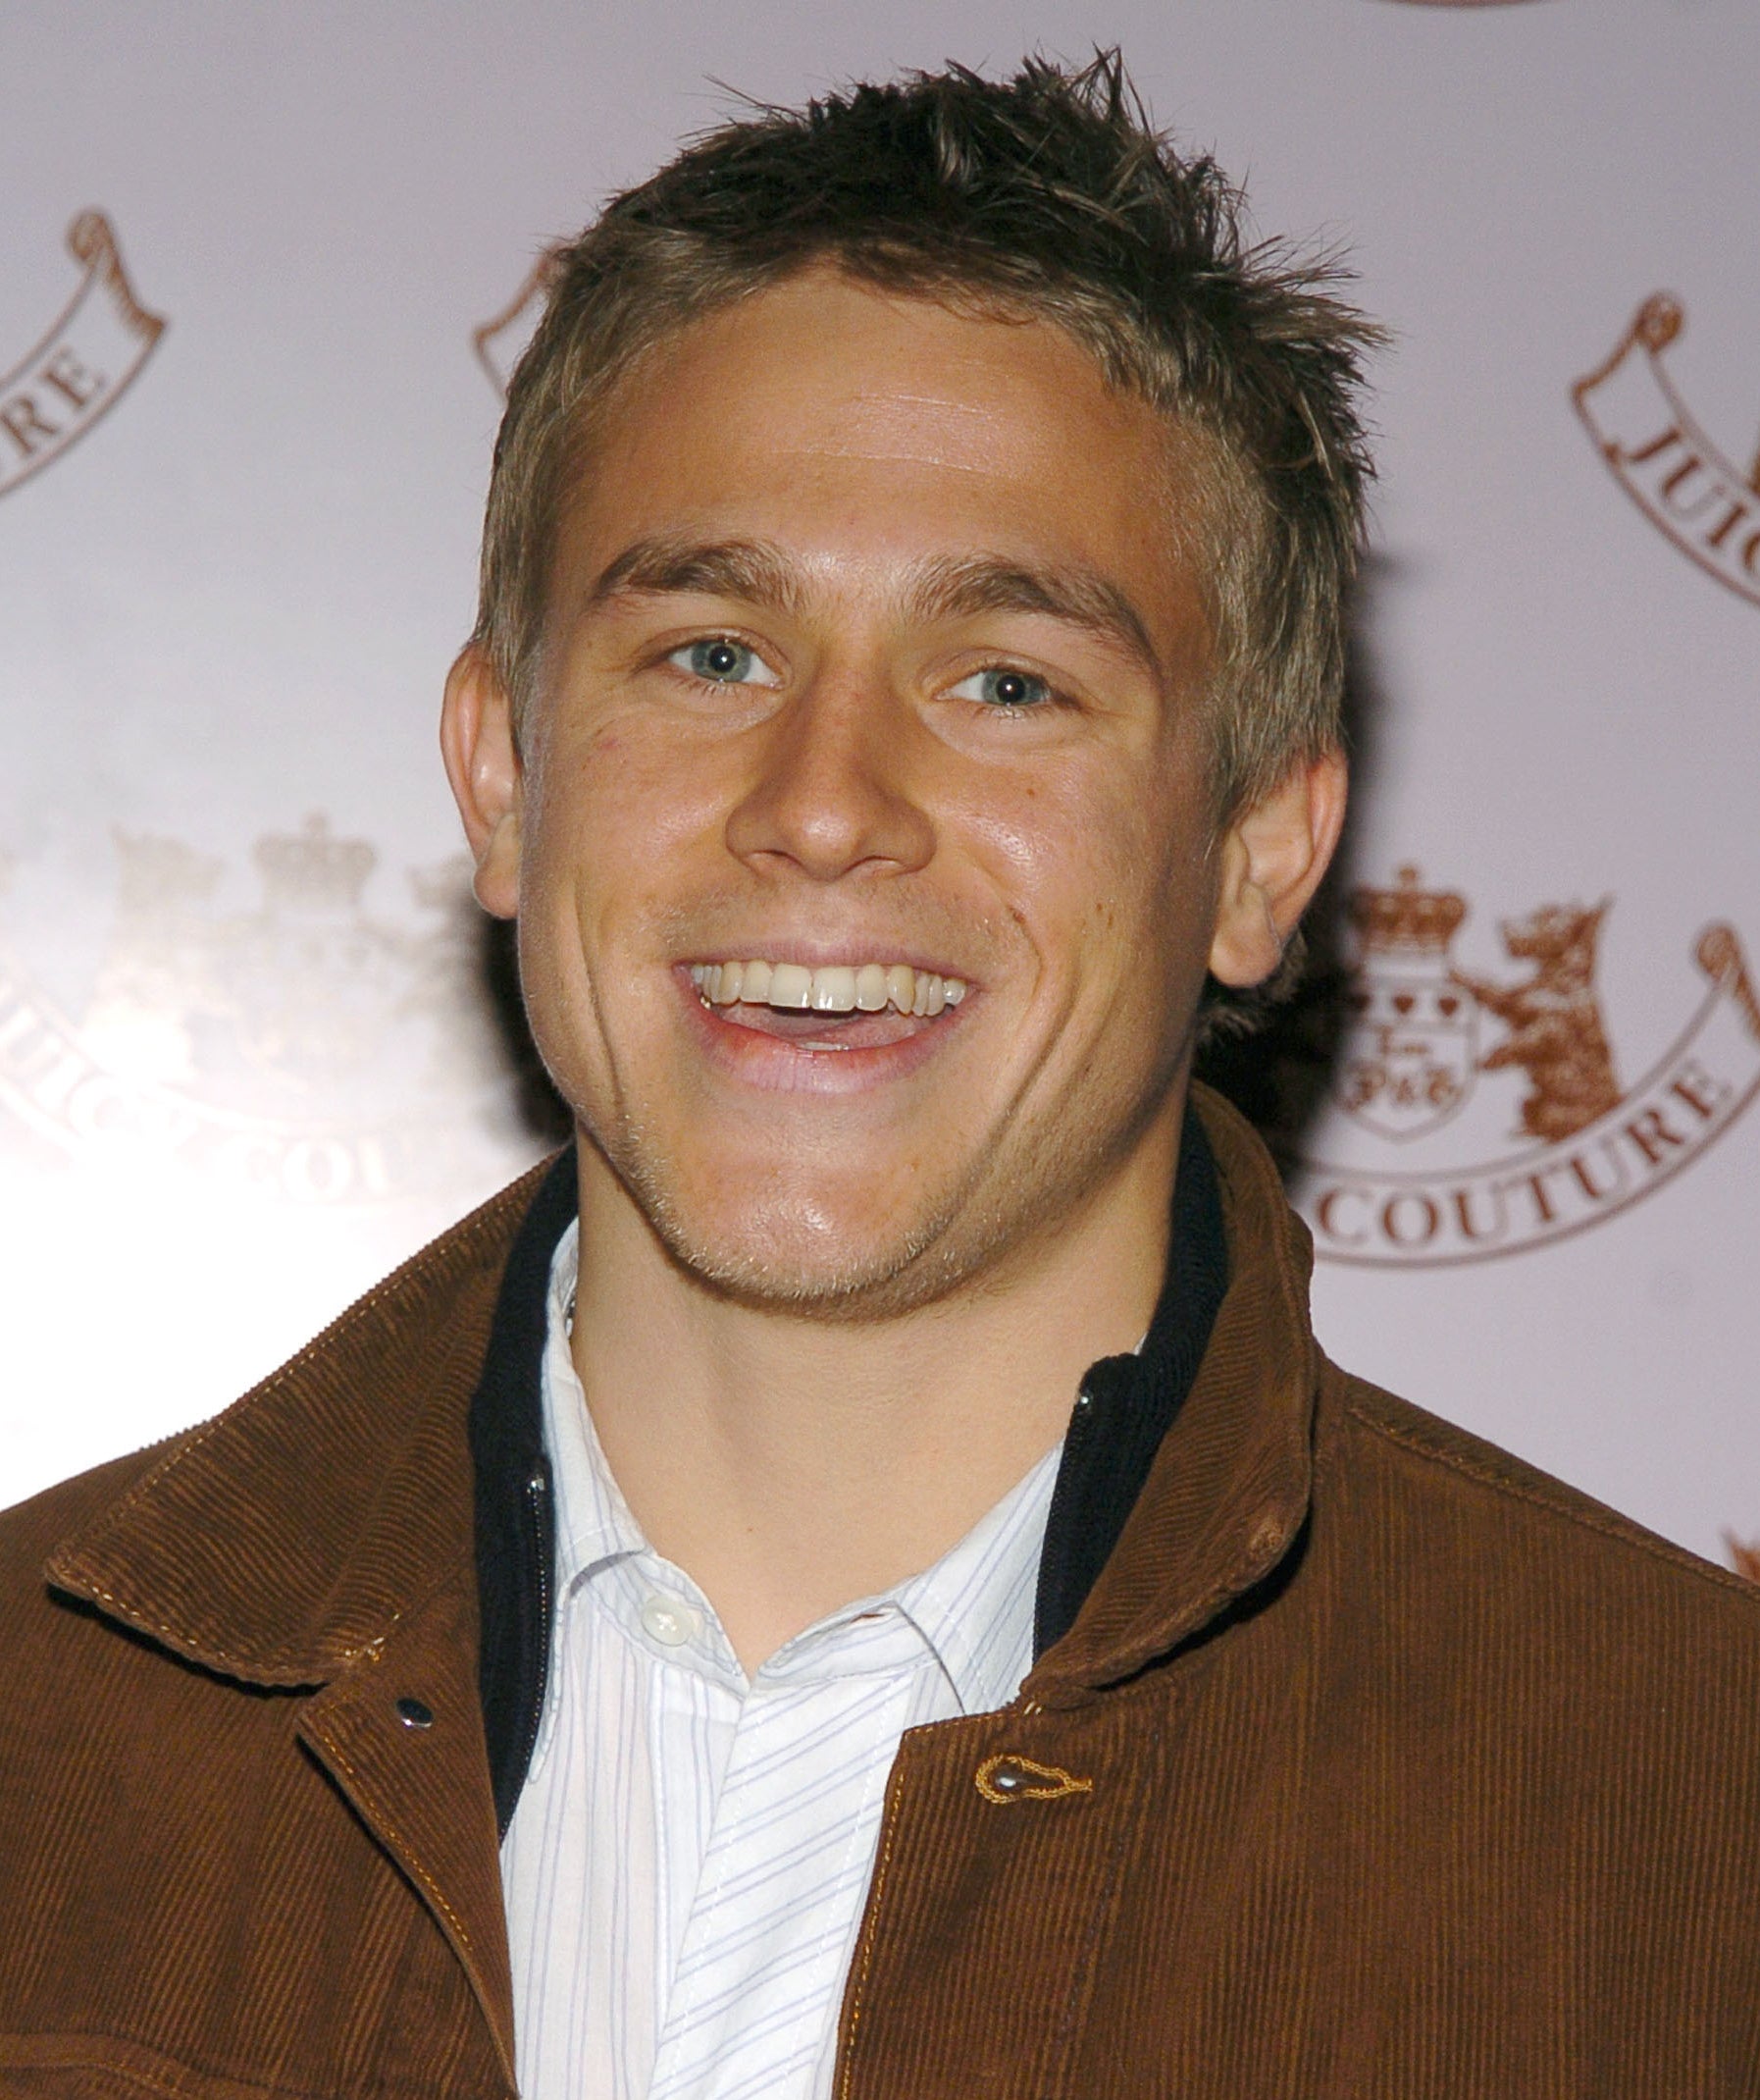 A younger Charlie Hunnam smiling widely at an event